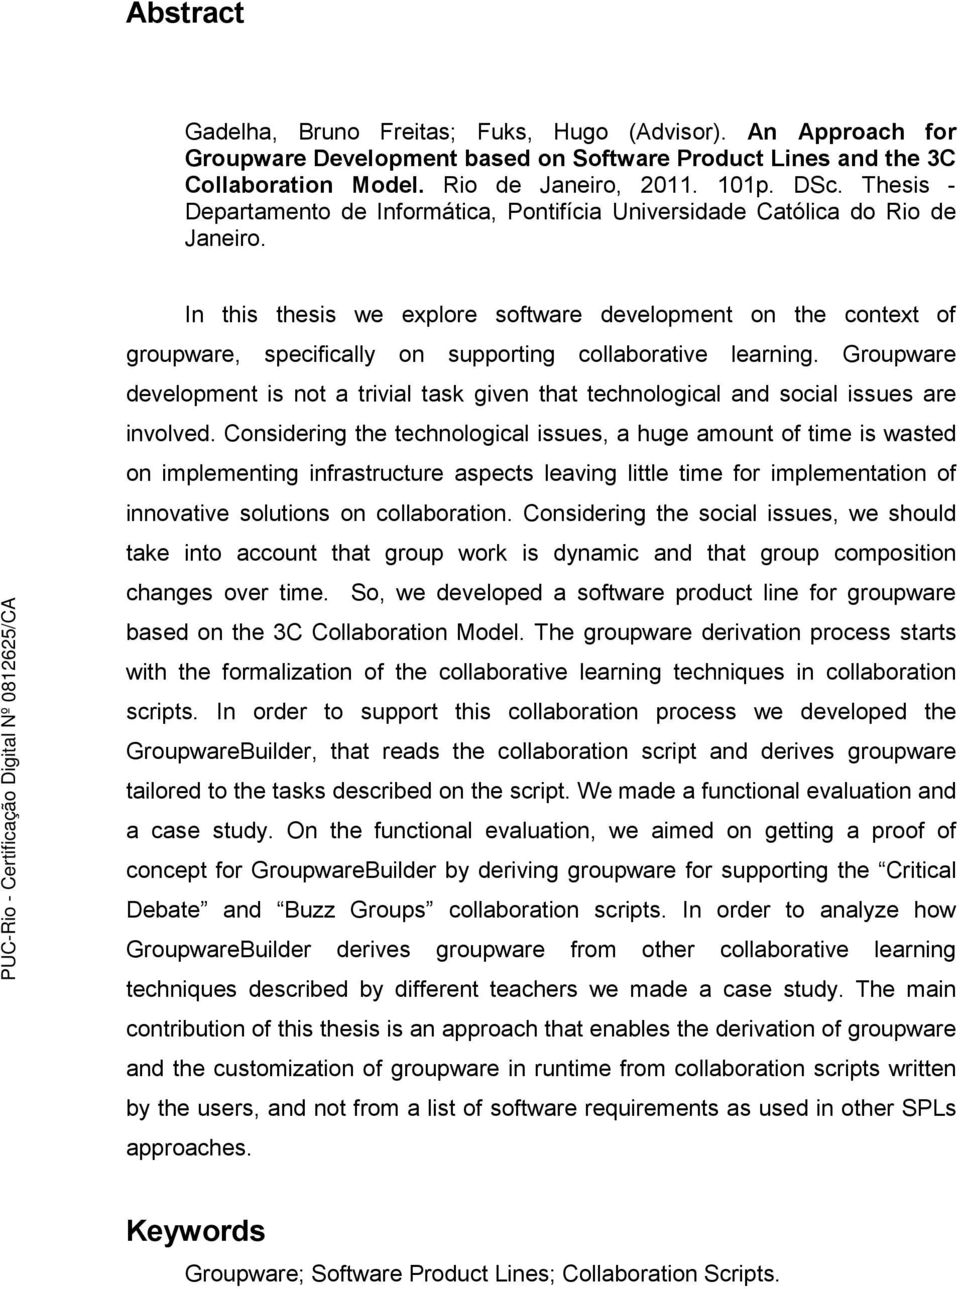 In this thesis we explore software development on the context of groupware, specifically on supporting collaborative learning.